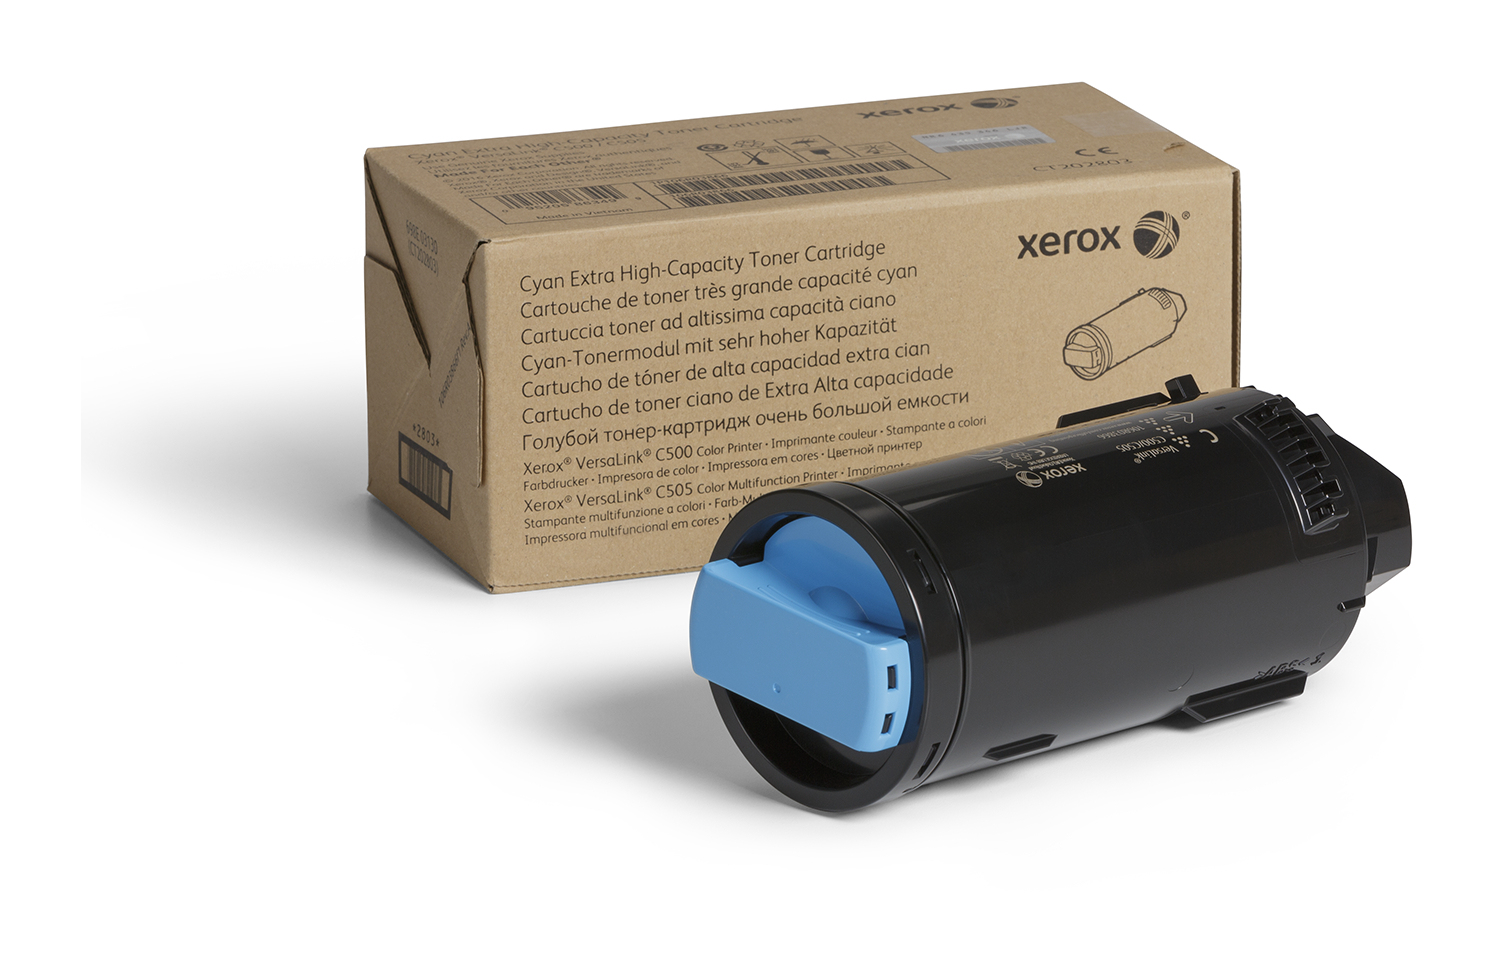 Photos - Ink & Toner Cartridge Xerox 106R03873 Toner-kit cyan extra High-Capacity, 9K pages for 